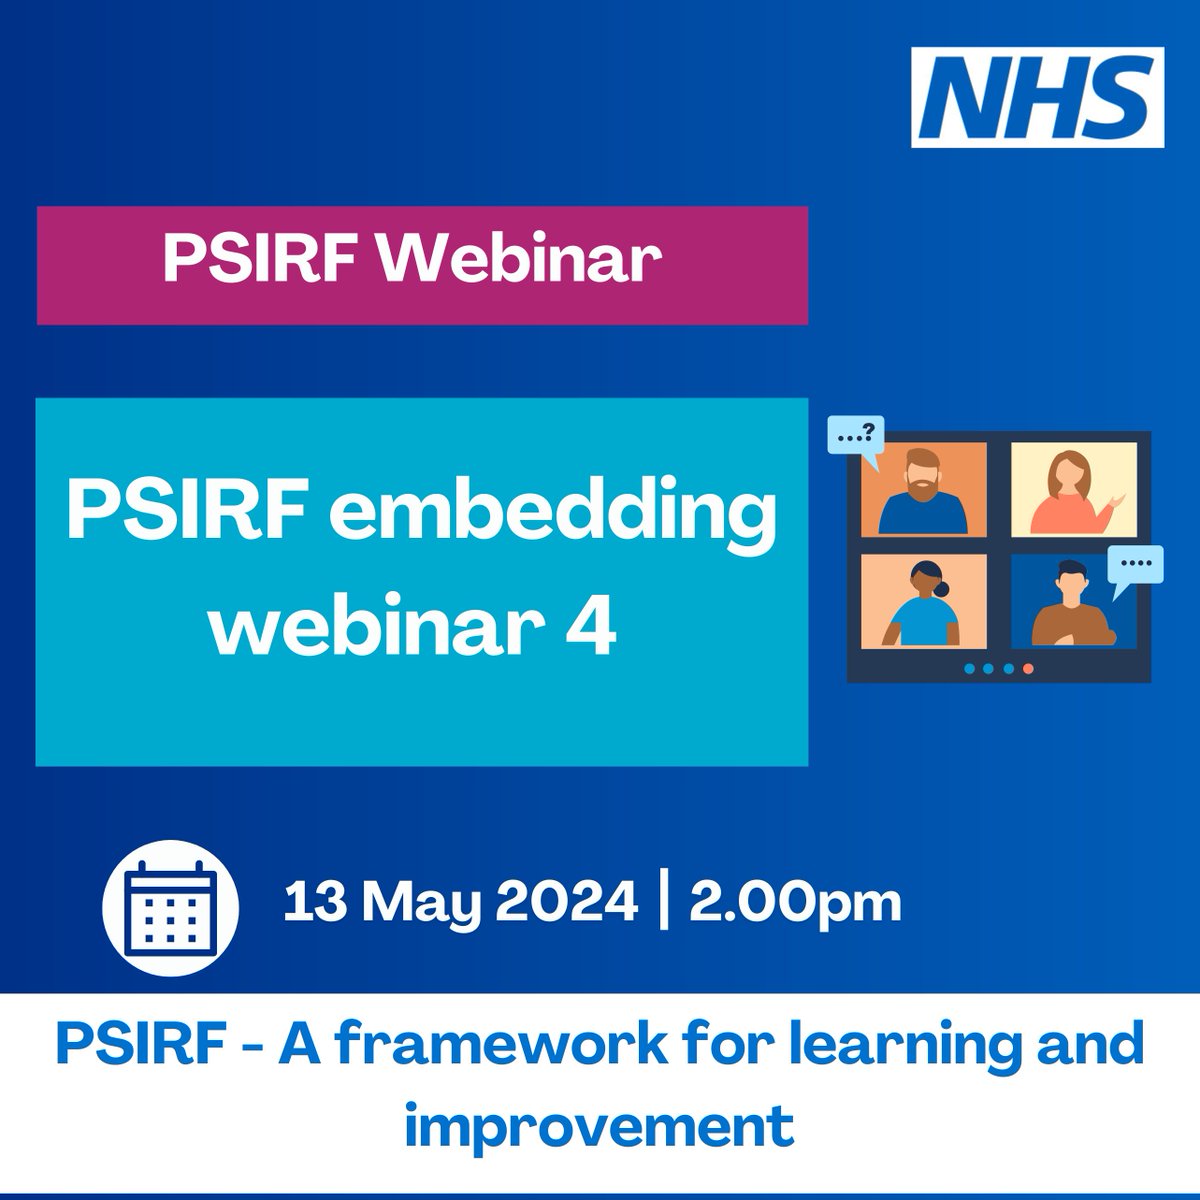 Due to demand we have extended the number of places available for our next #PSIRF embedding webinar taking place on 13 May 2024. Sign up here 👉events.england.nhs.uk/events/psirf-e…